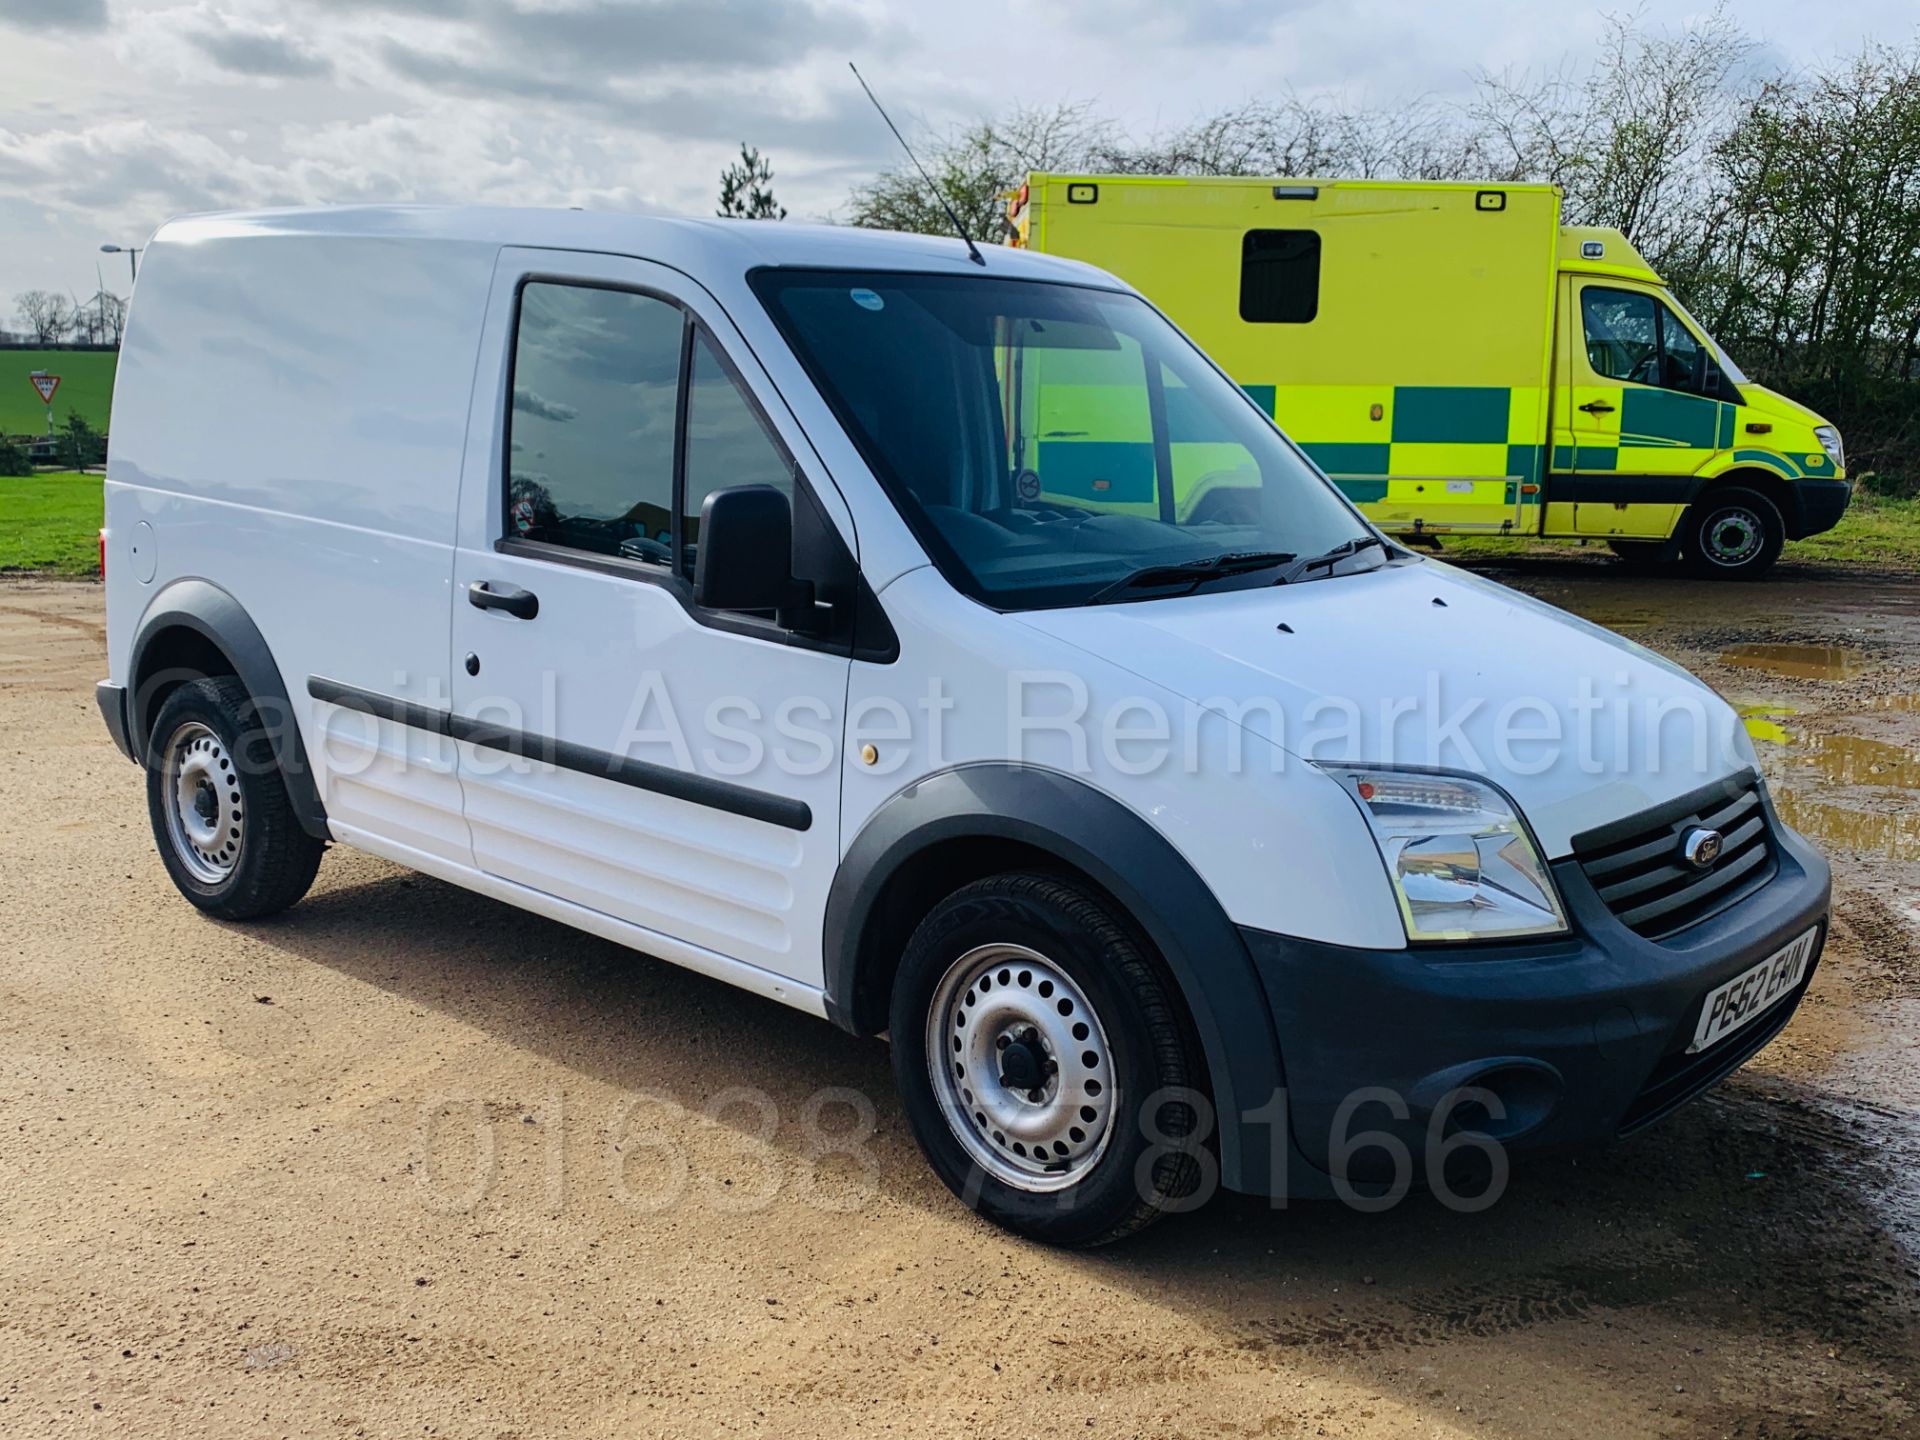 ON SALE FORD TRANSIT CONNECT T200 *LCV - PANEL VAN* (2013 MODEL) '1.8 TDCI -*LOW MILES - Image 10 of 30